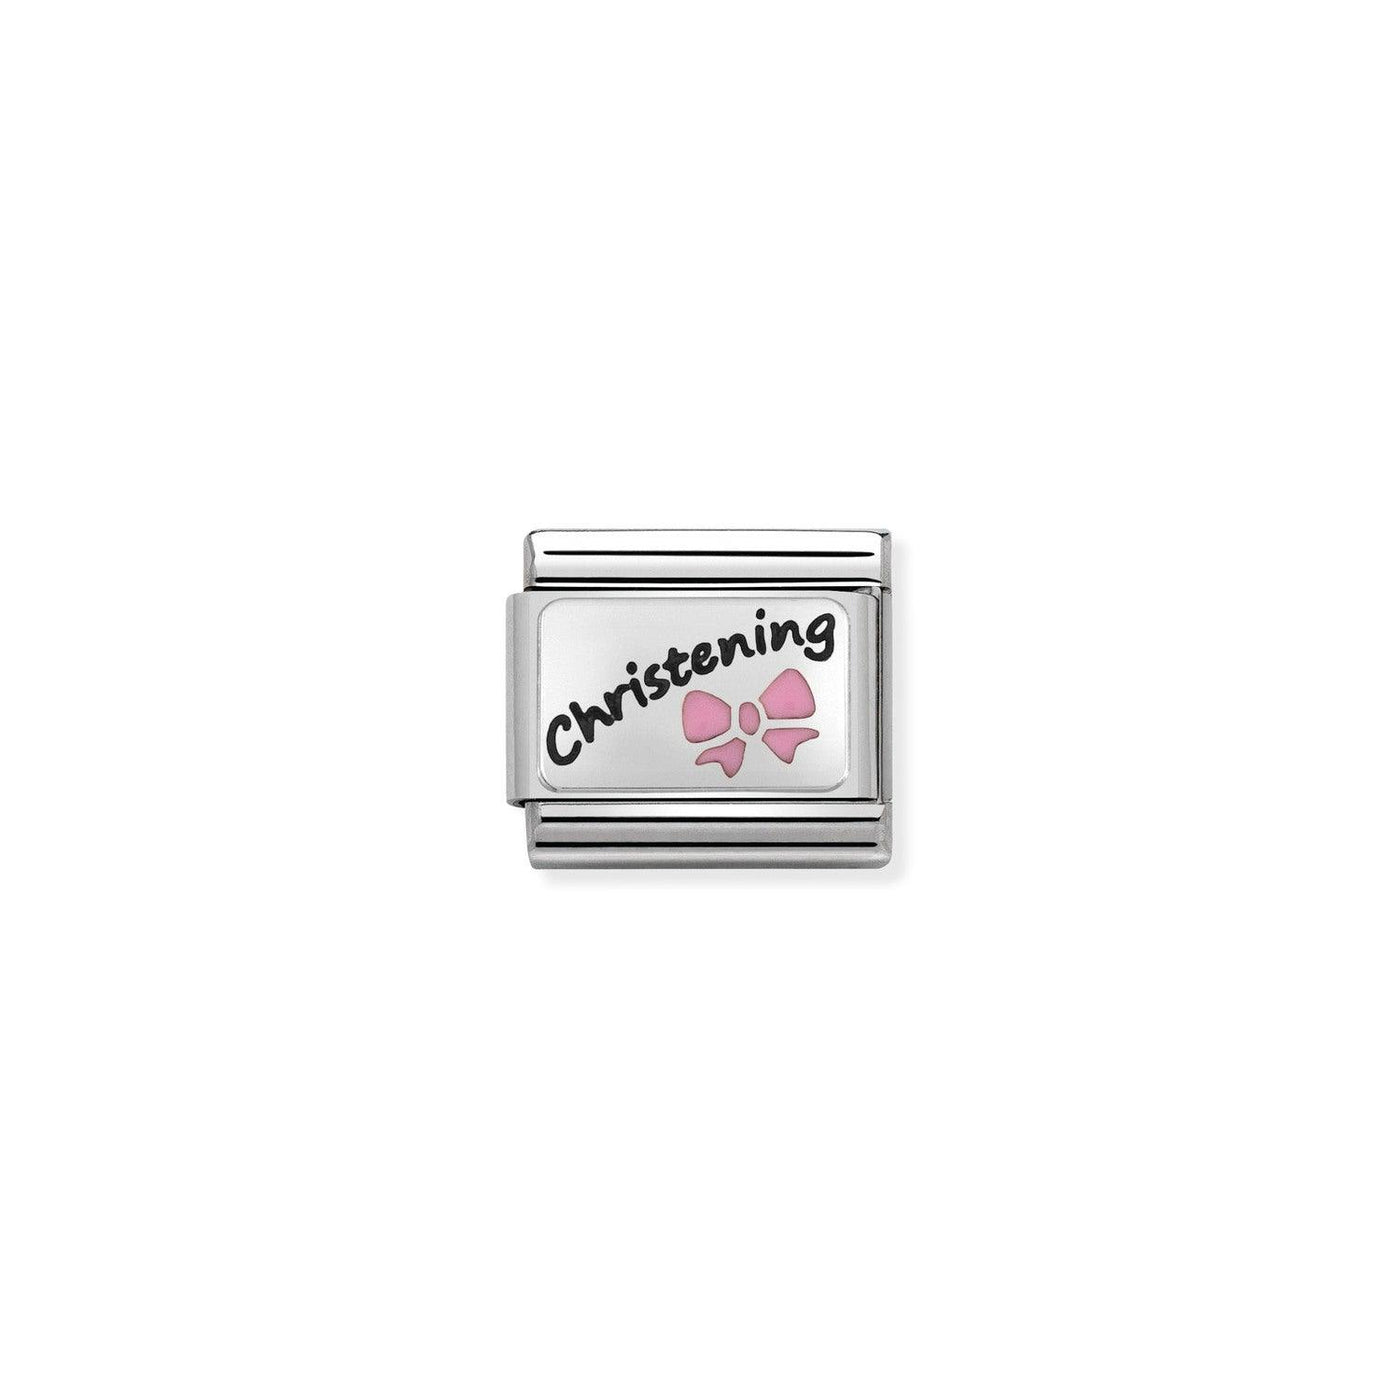 Nomination Classic Silver and Pink Christening Charm - Rococo Jewellery